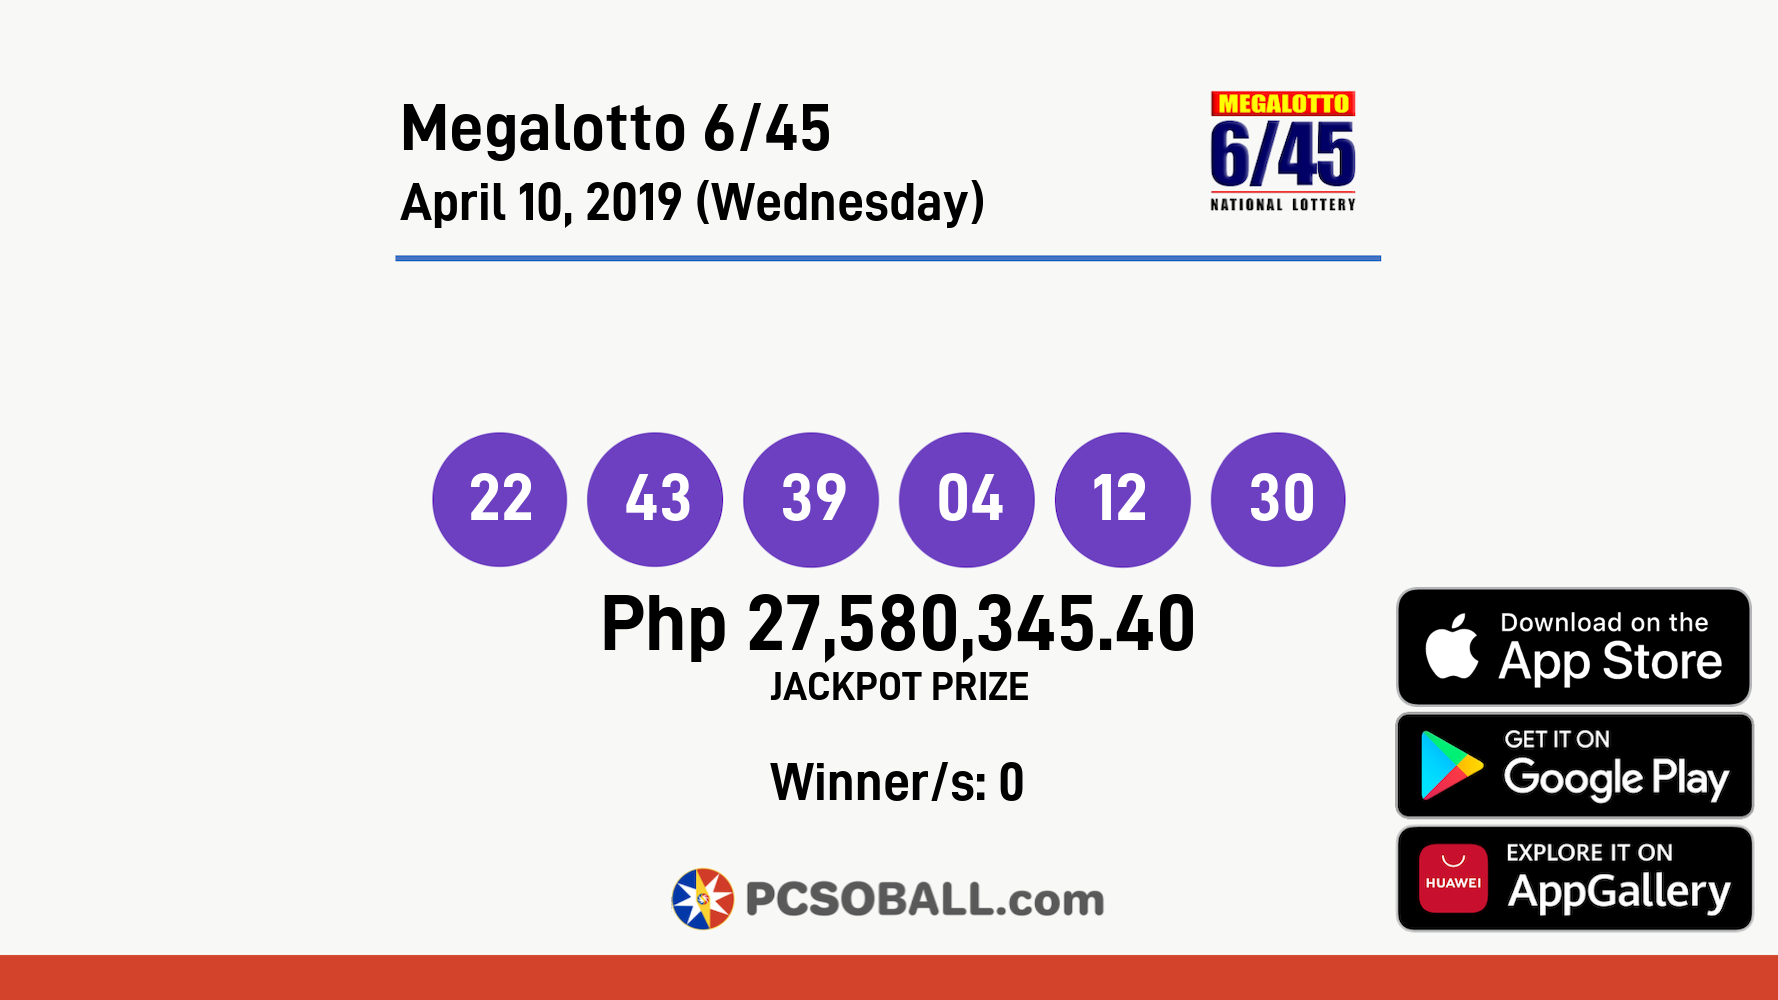 Megalotto 6/45 April 10, 2019 (Wednesday) Result